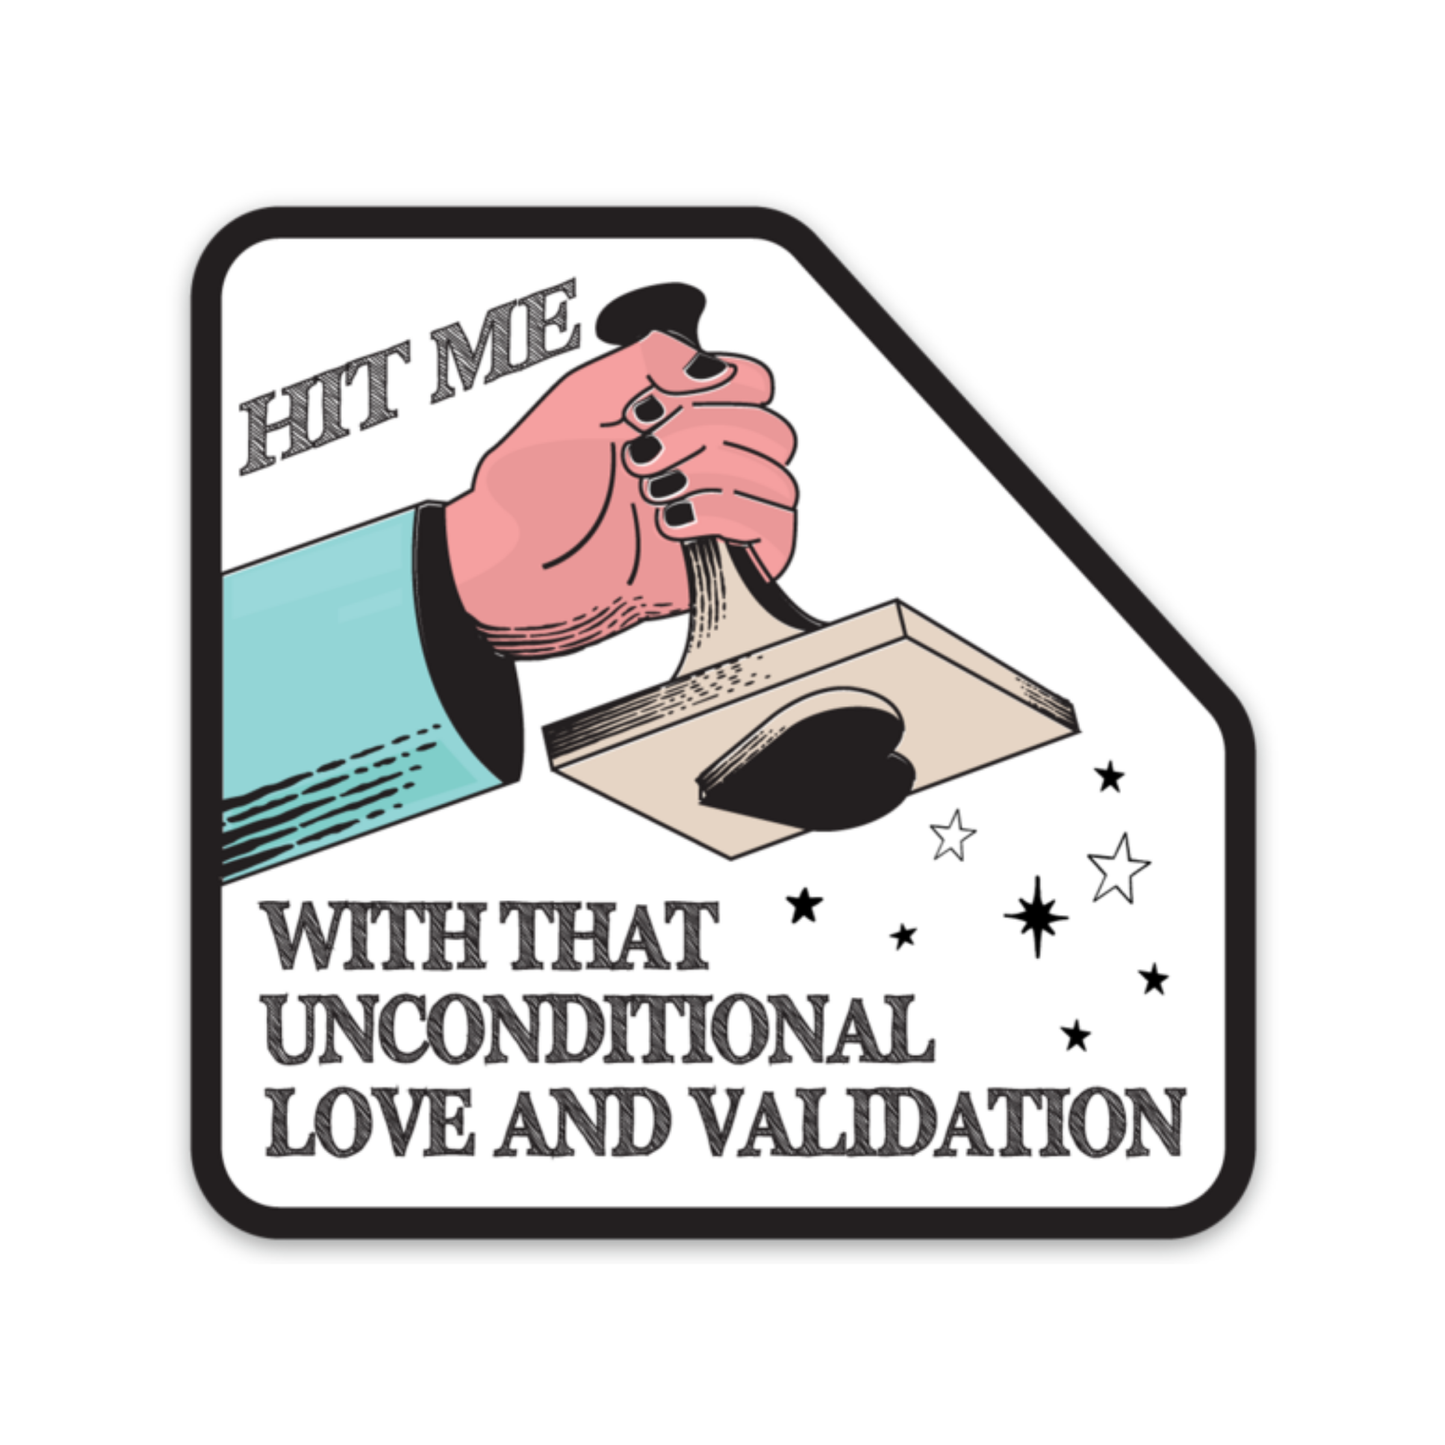 Hit Me With That Unconditional Love and Validation Sticker